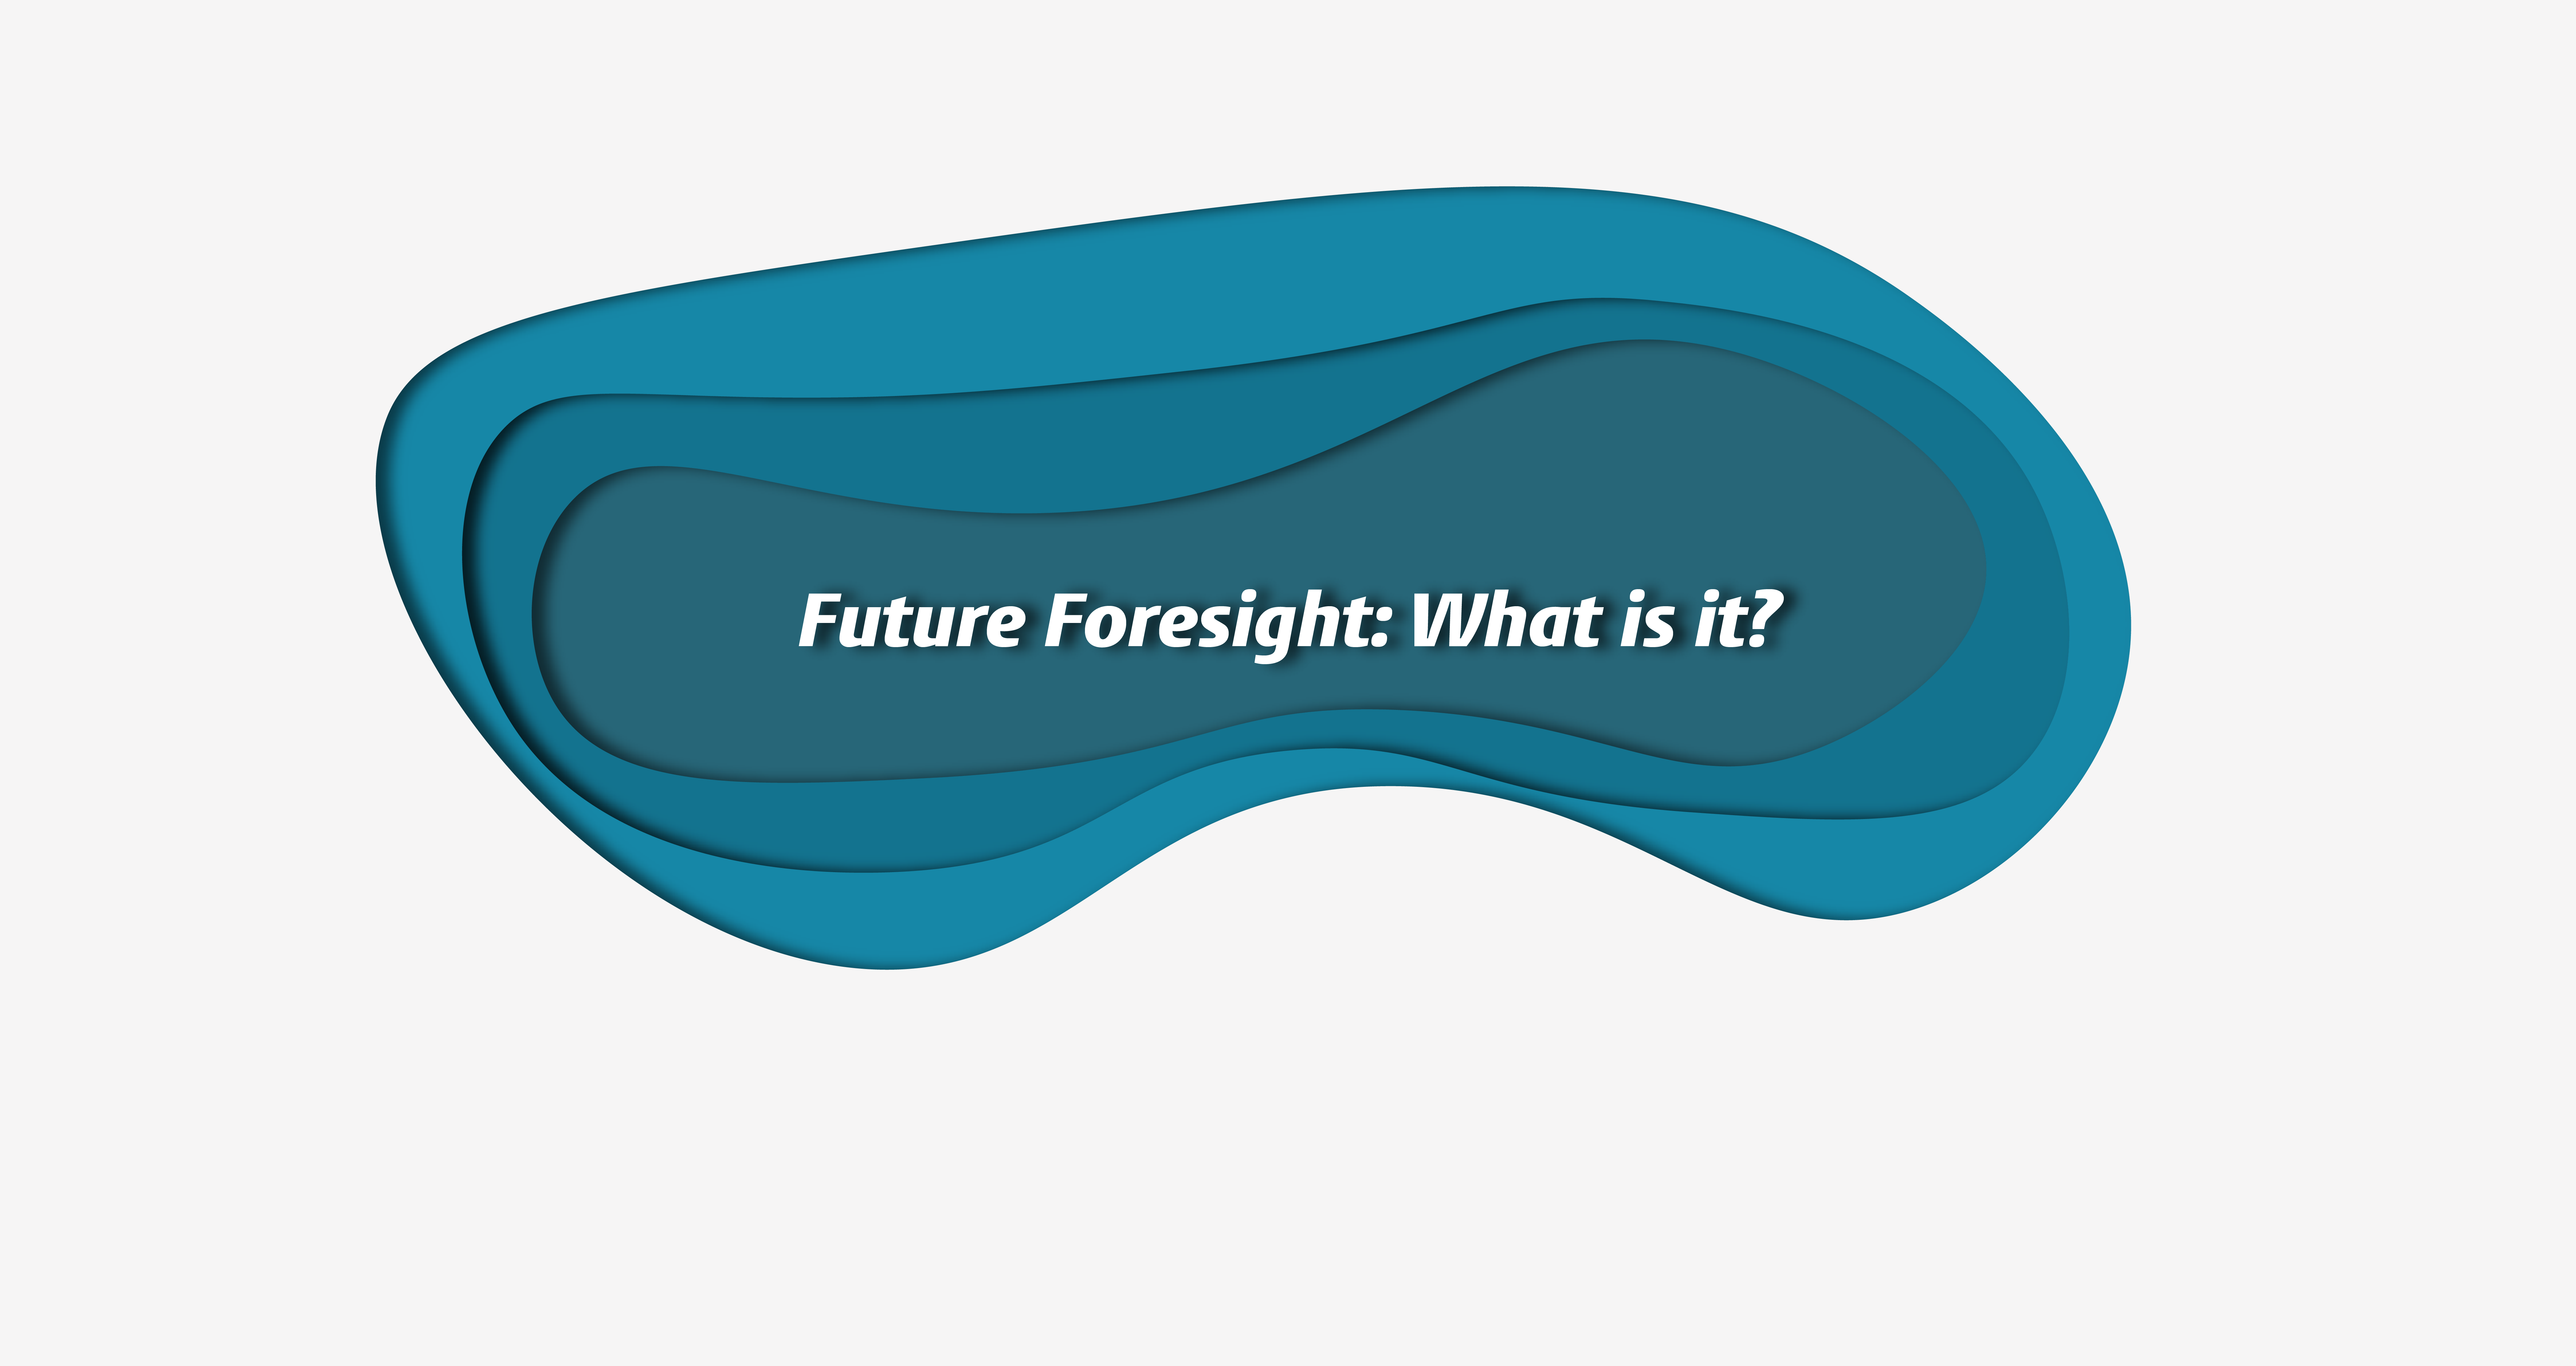 Future Foresight: What is it?